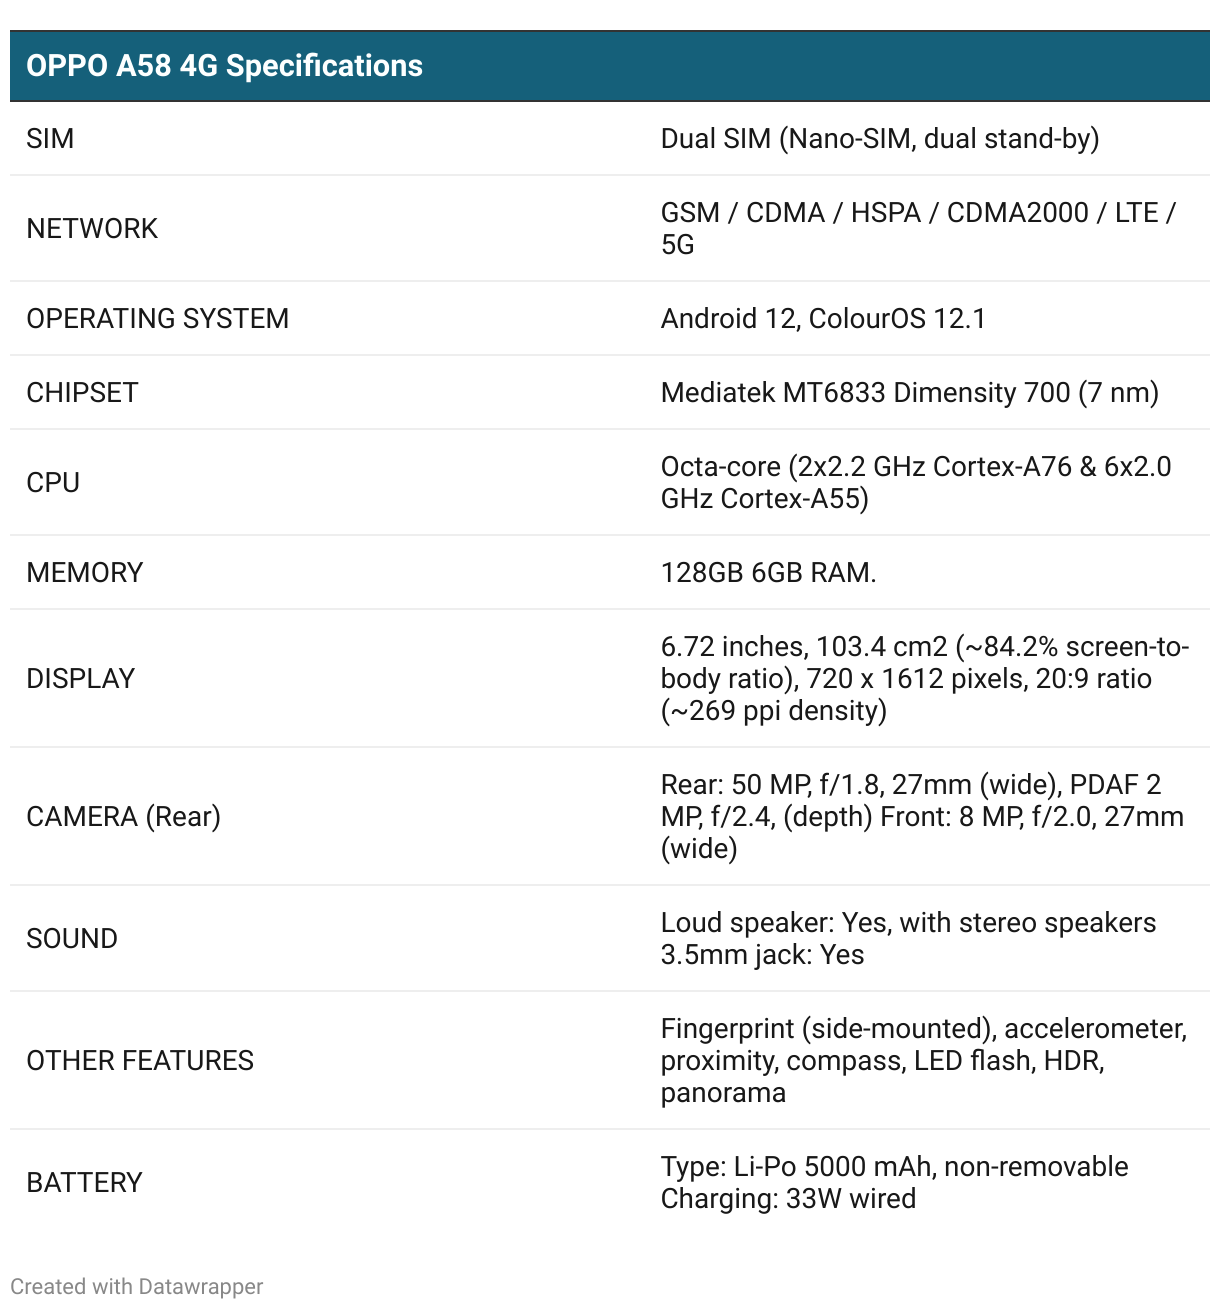 Spec table for OPPO A58 4G smartphone